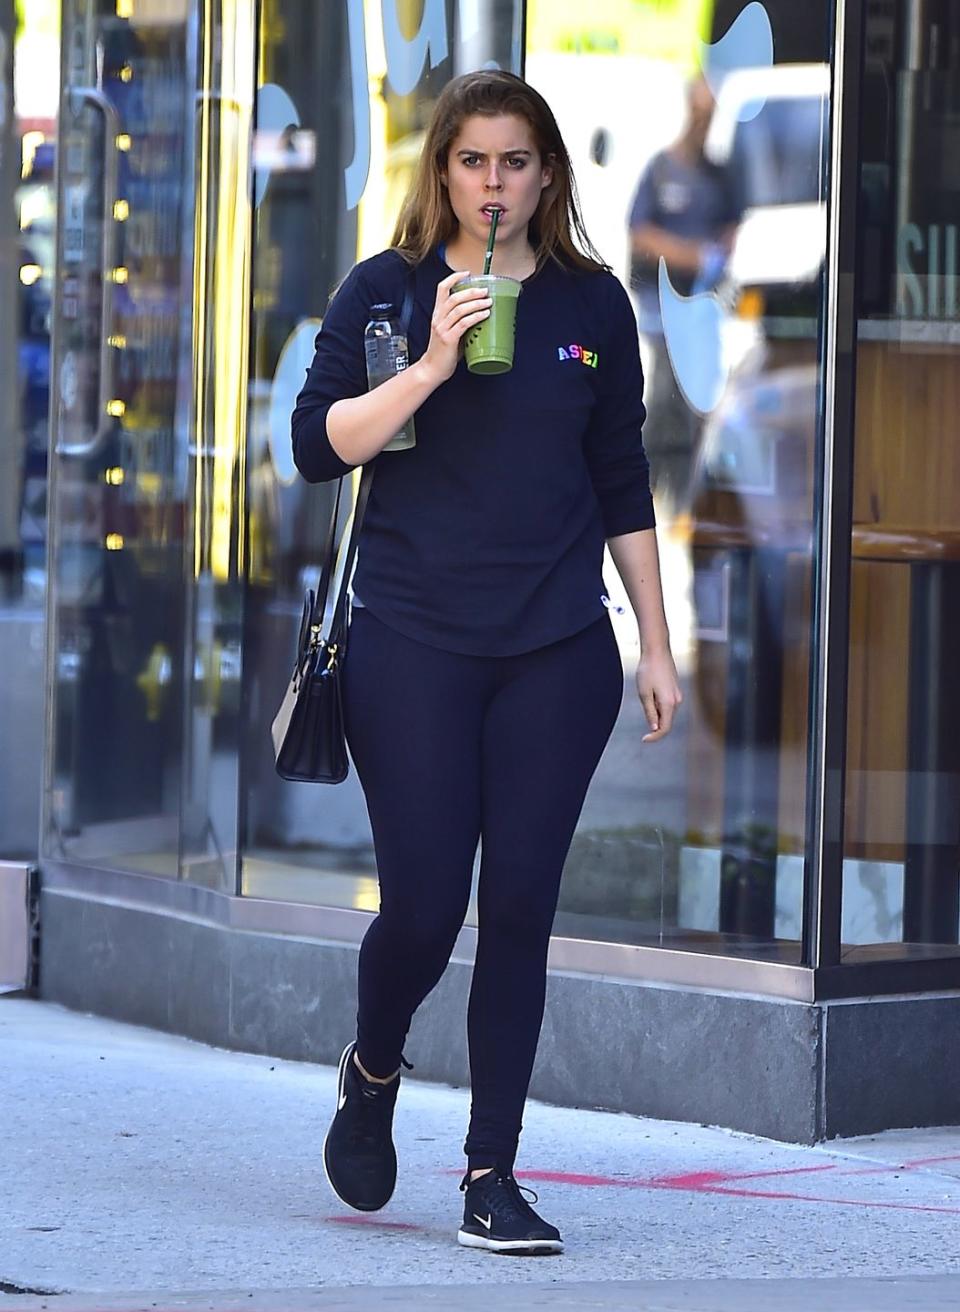 <p>Walking around Soho, drinking a green juice while wearing head-to-toe black athleisure. Princess Beatrice is all of us. <br></p>